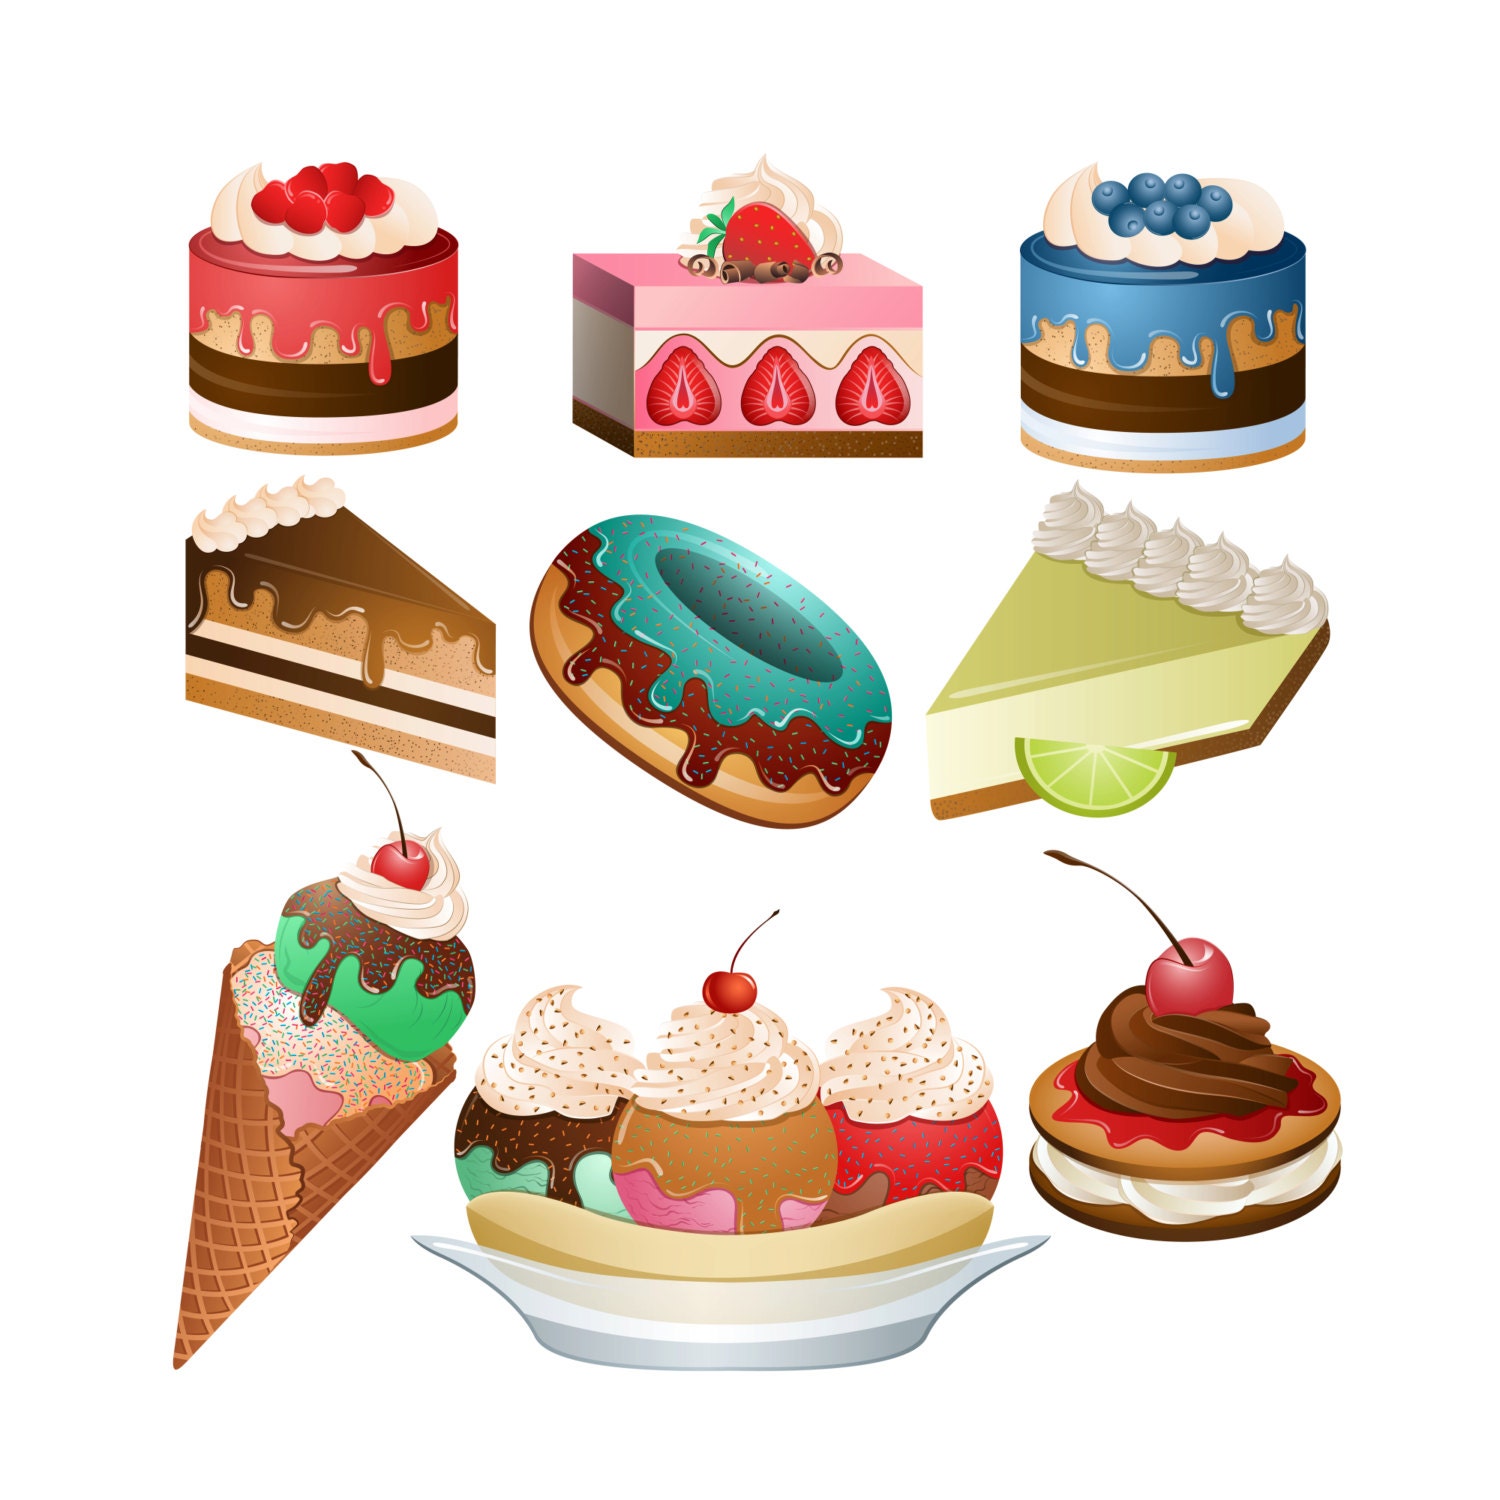 Desserts ClipArt Set of 9 PNG JPG and Vector Desserts